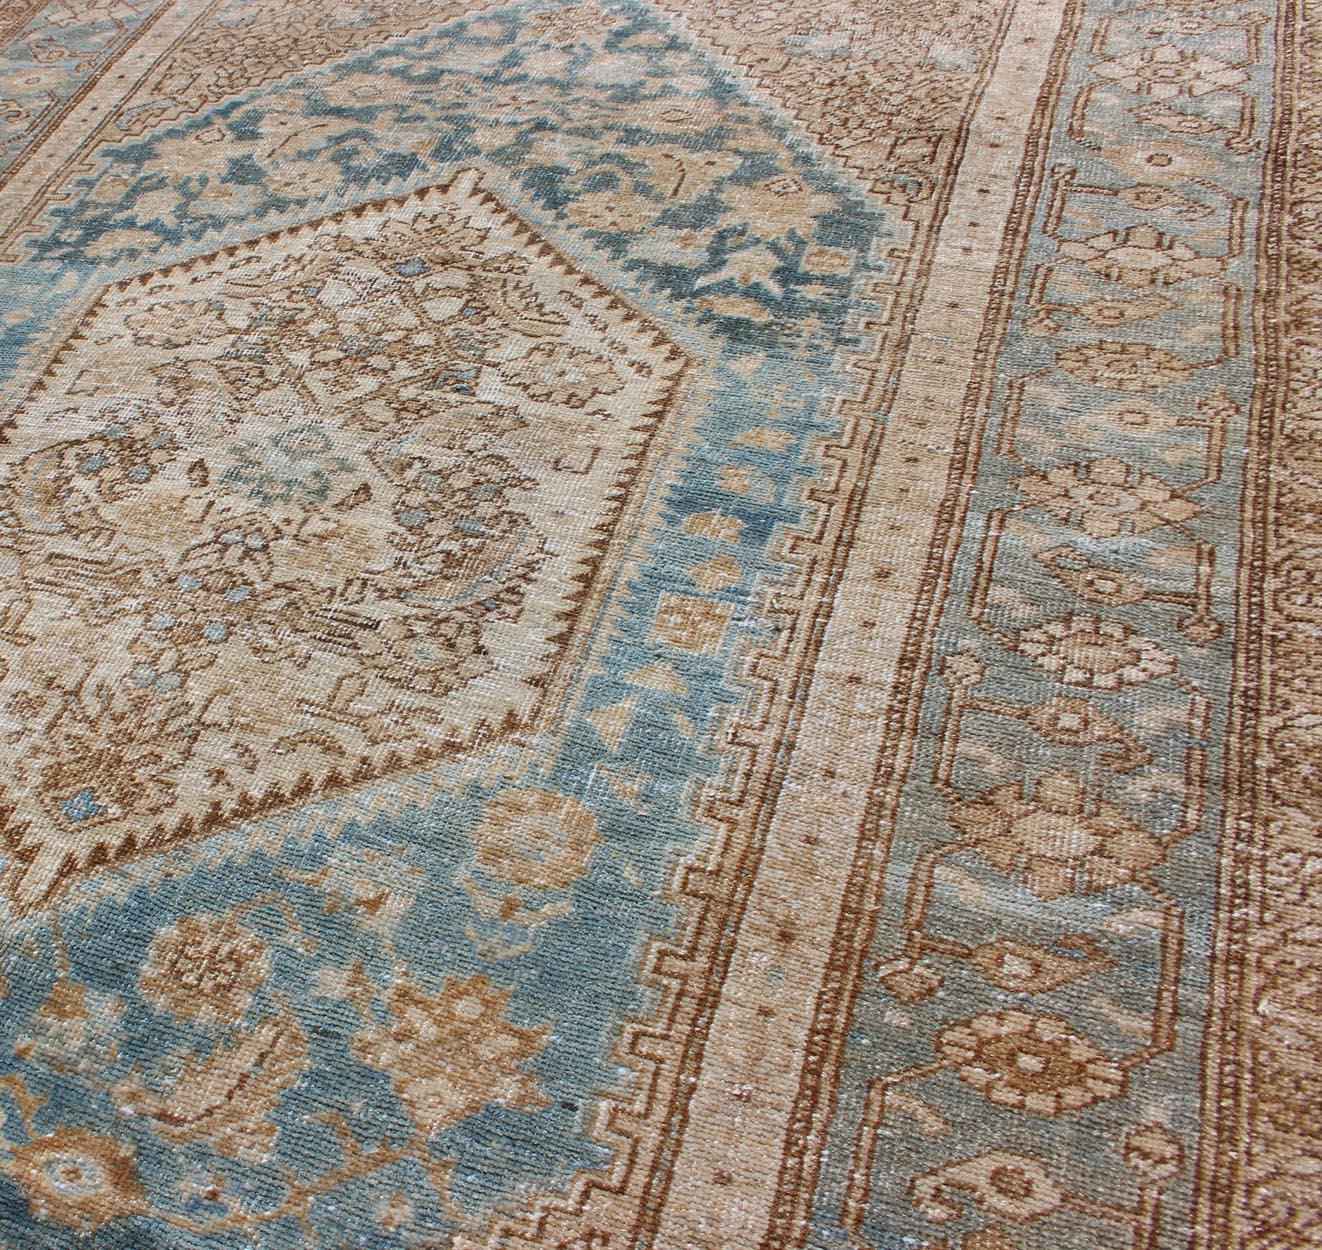 Antique Persian Hamadan Rug with Layered Medallions in Blue, Brown and Taupe  For Sale 1